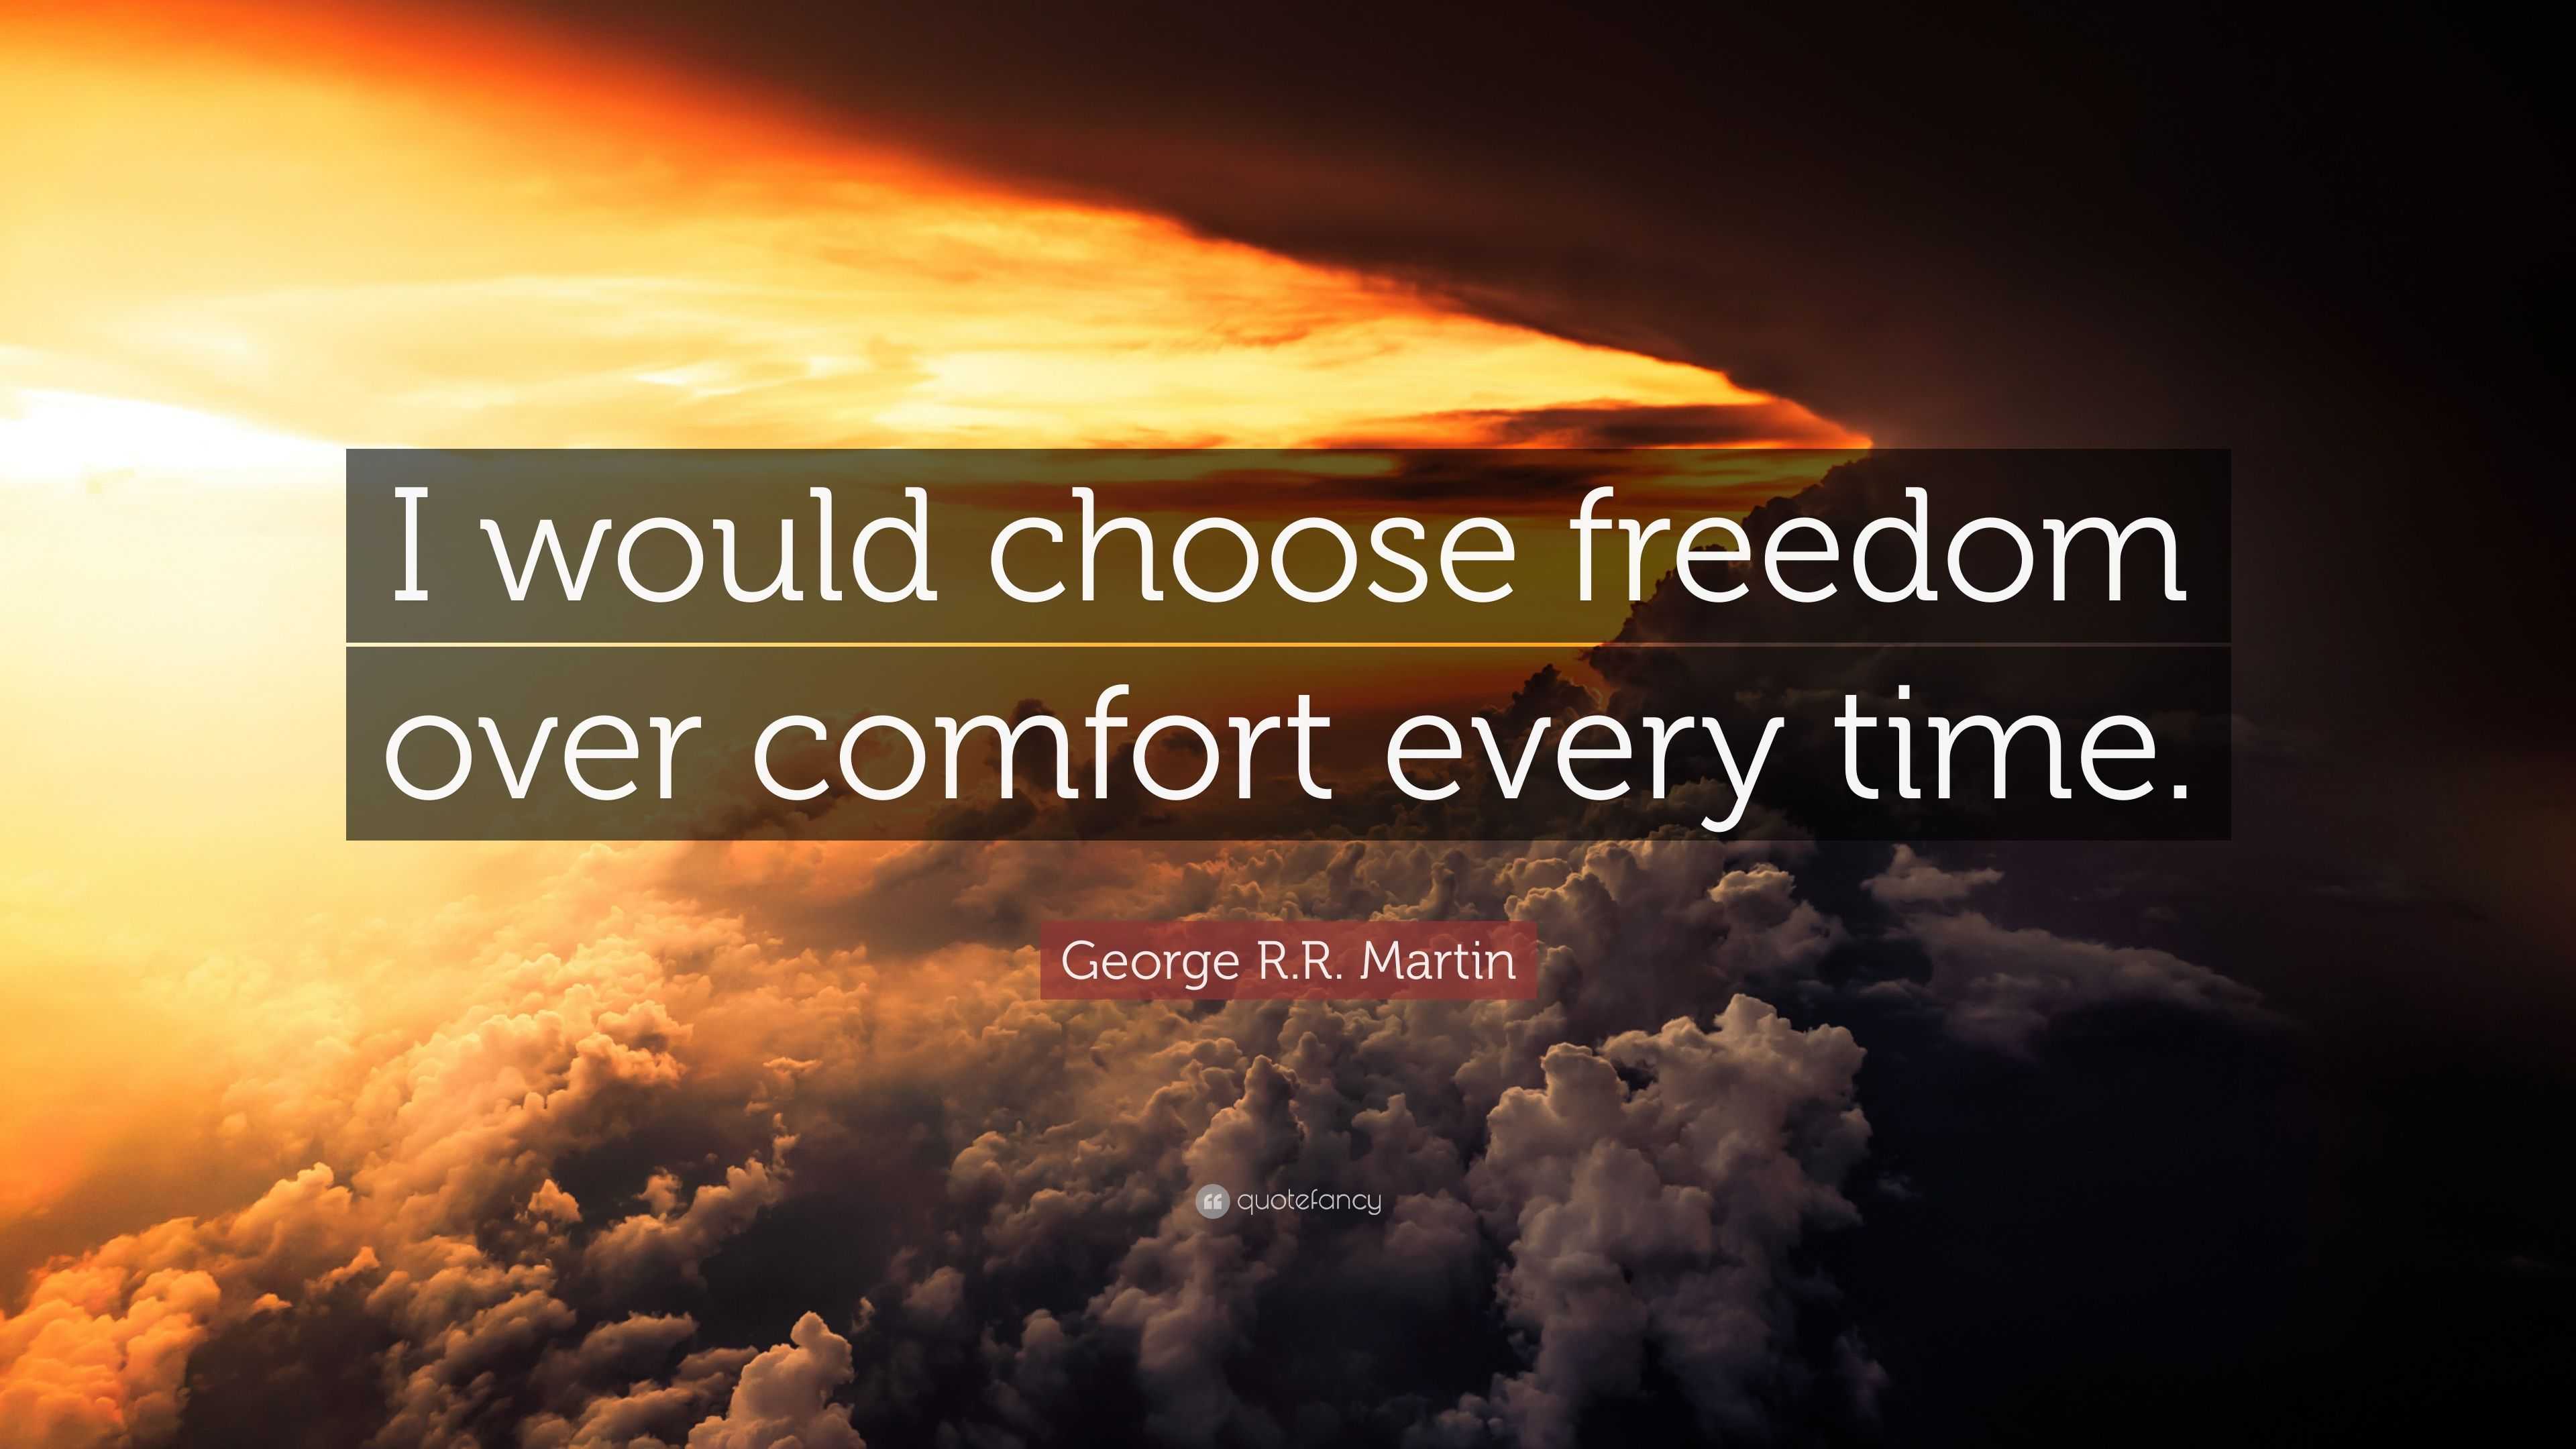 About, Freedom Comfort